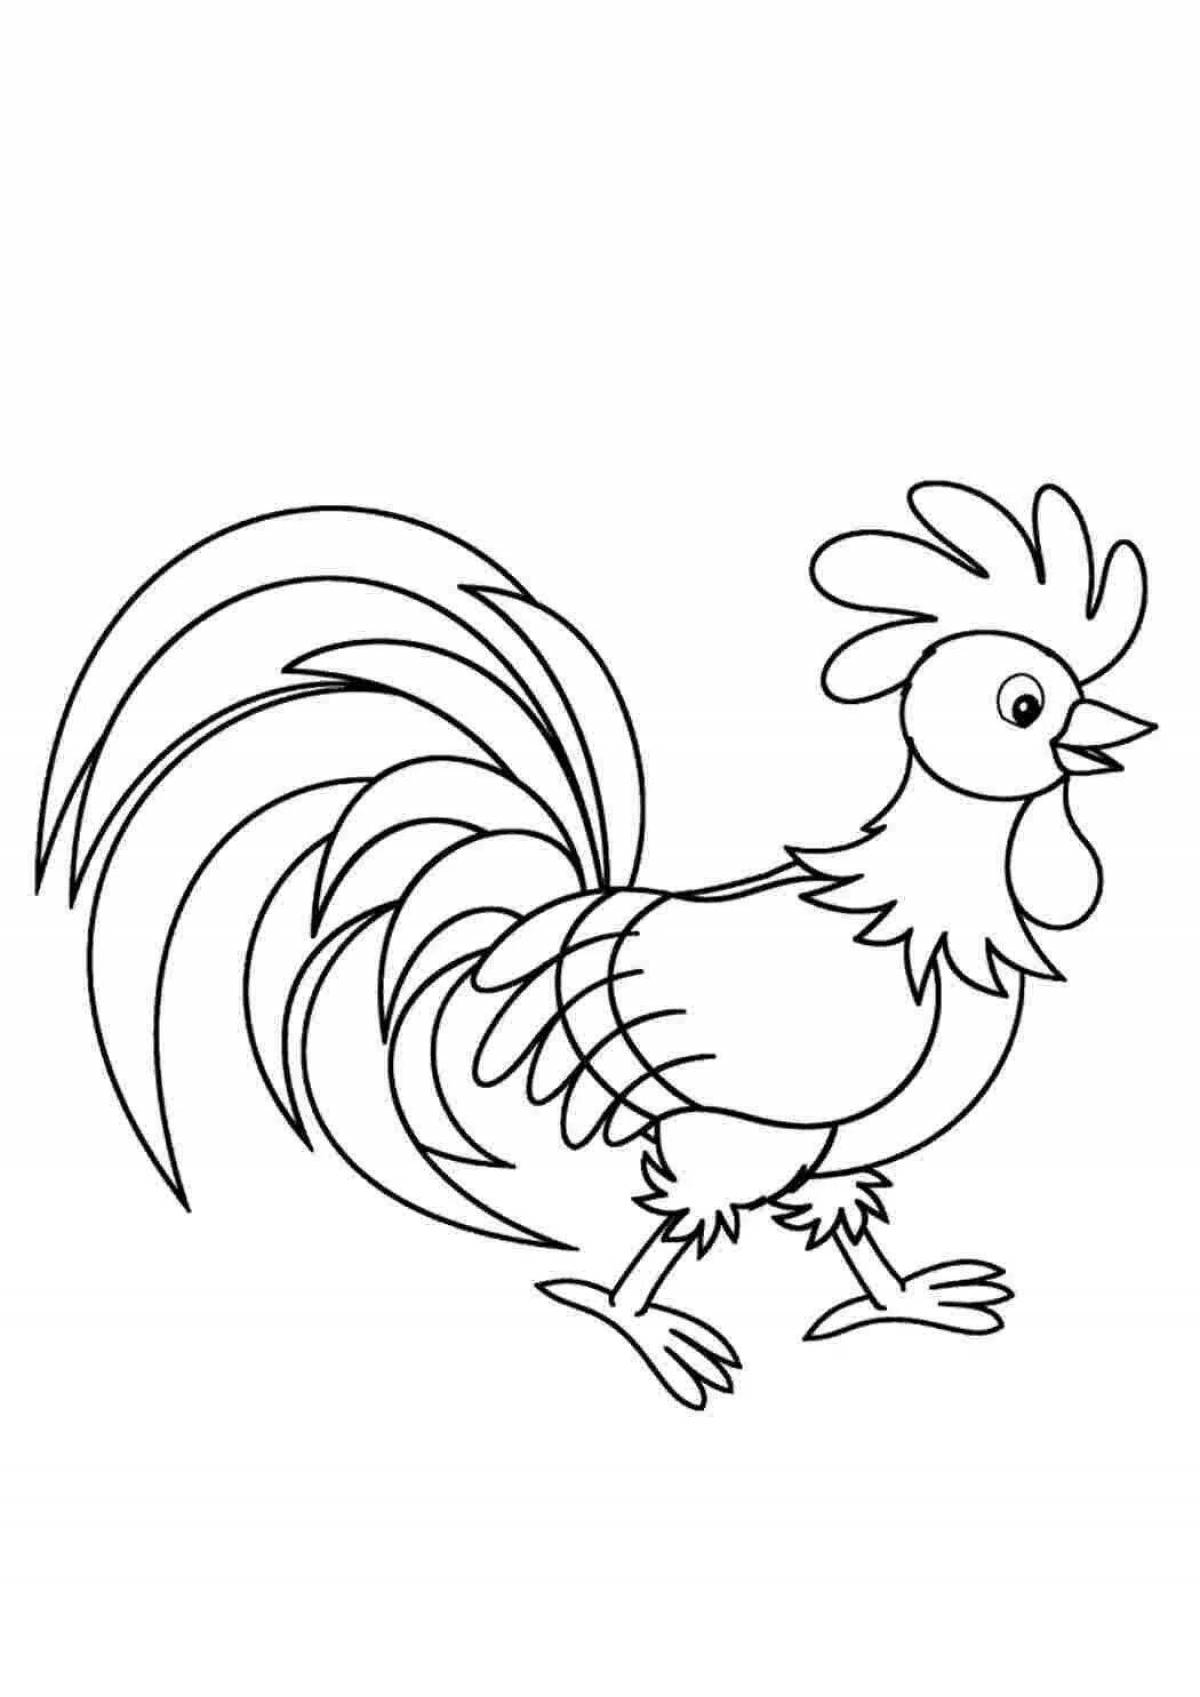 Coloring book cute rooster for children 6-7 years old